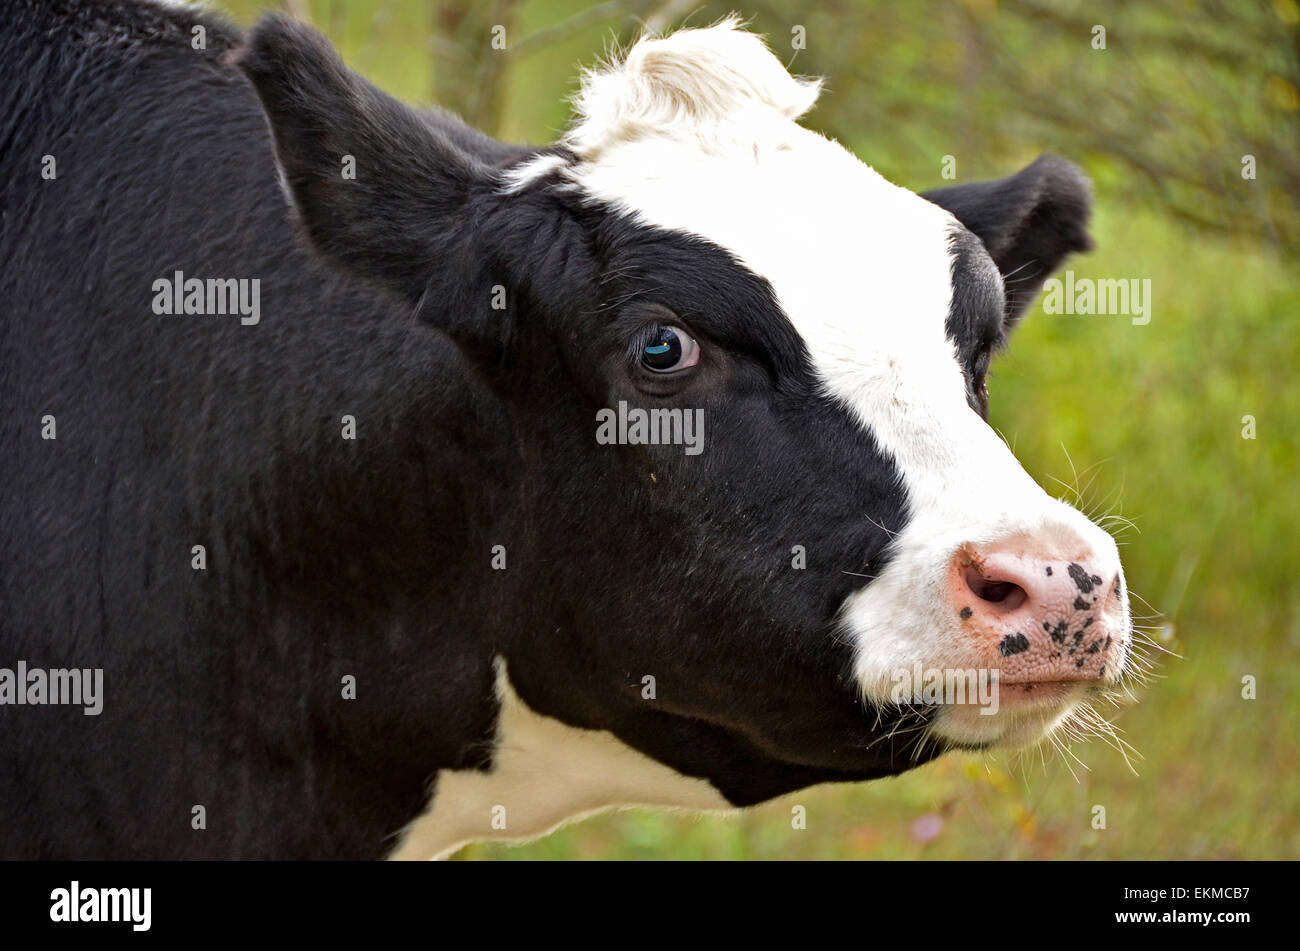 Black and white Holstein cow in pasture. Stock Photo